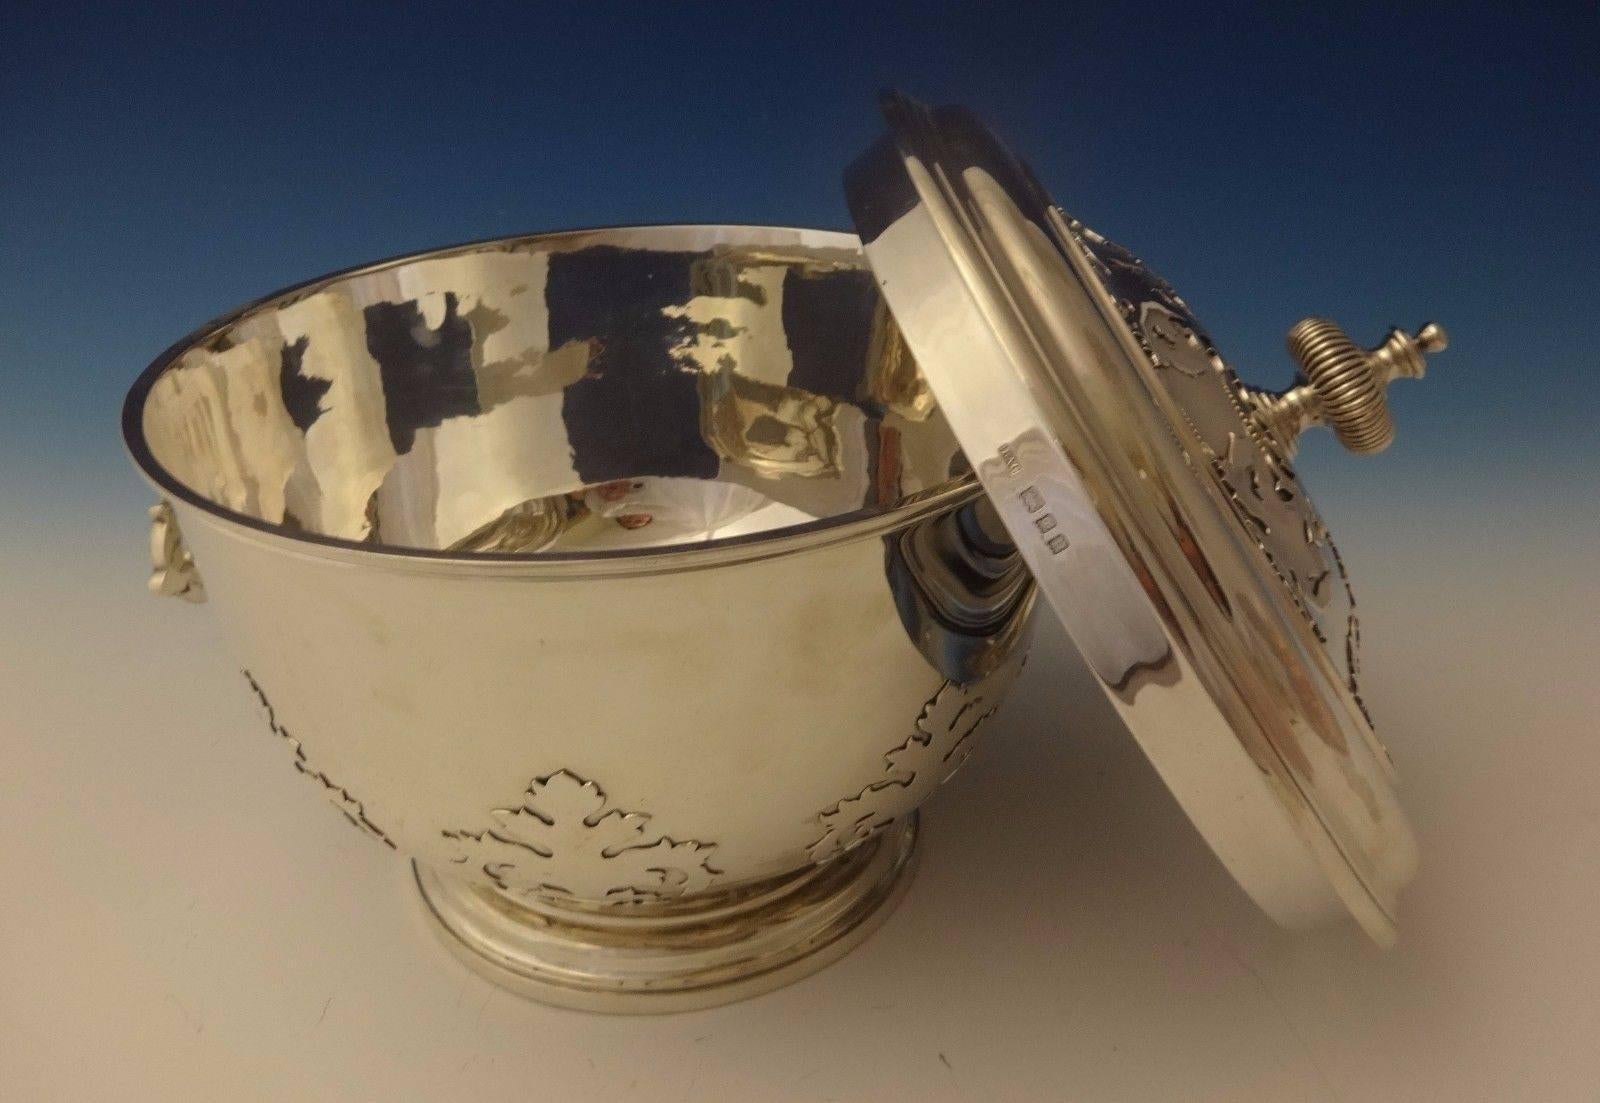 Crichton.

This exquisite sterling ice bucket was made by Crichton. It features an applied Arts & Crafts design. It has hinged handles and matching cover. The piece was made in London with date mark for 1930. Lionel Crichton and his brother